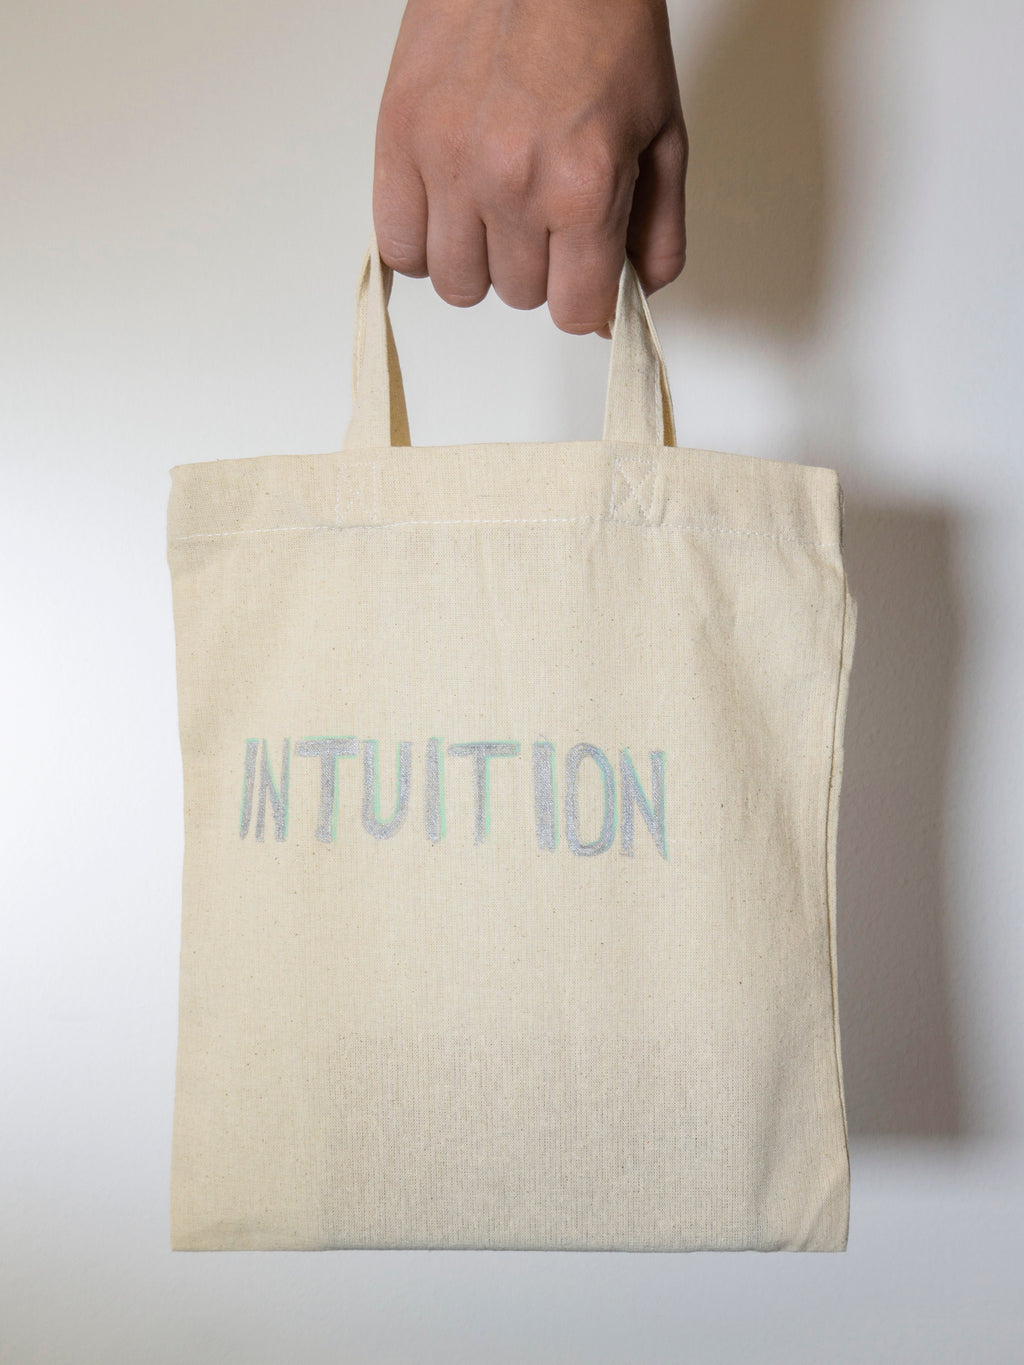 HAND PAINTED "GLOBAL INTUITION" TOTE BAG